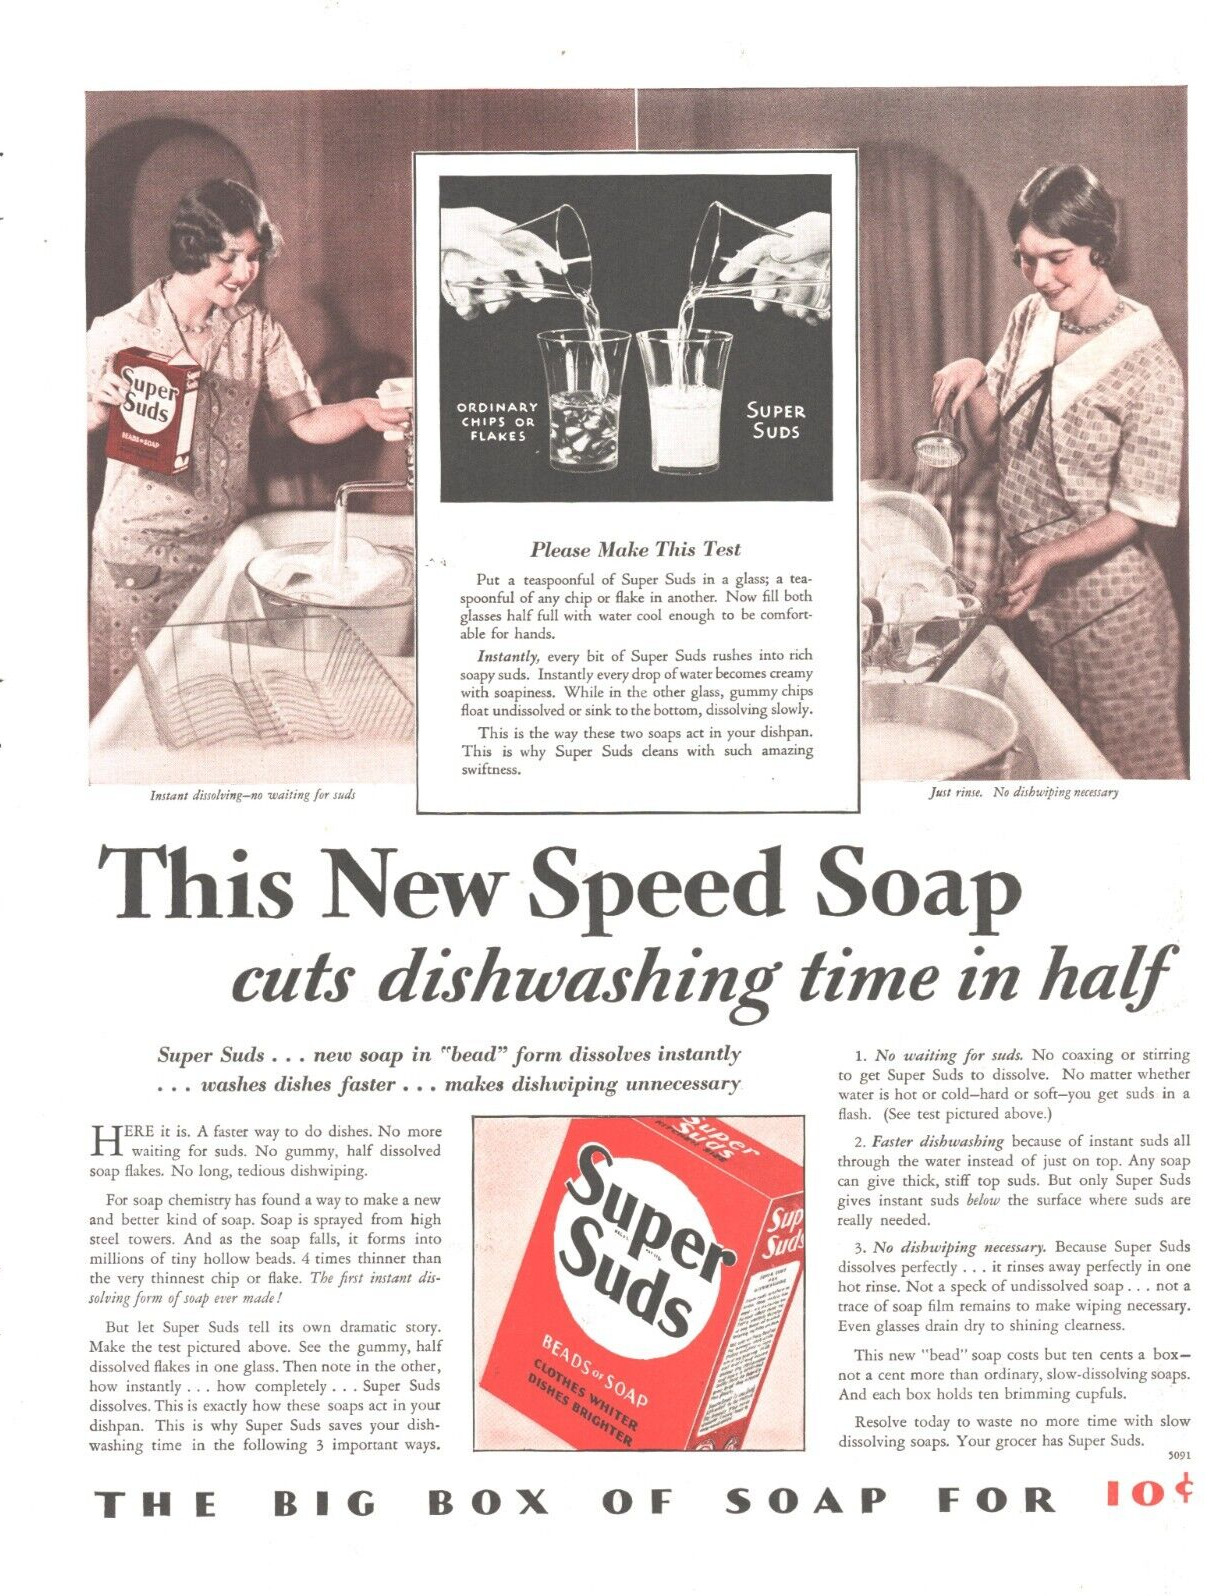 1930 Super Suds Dishwashing Soap Vintage Print Ad New Speed Housewife